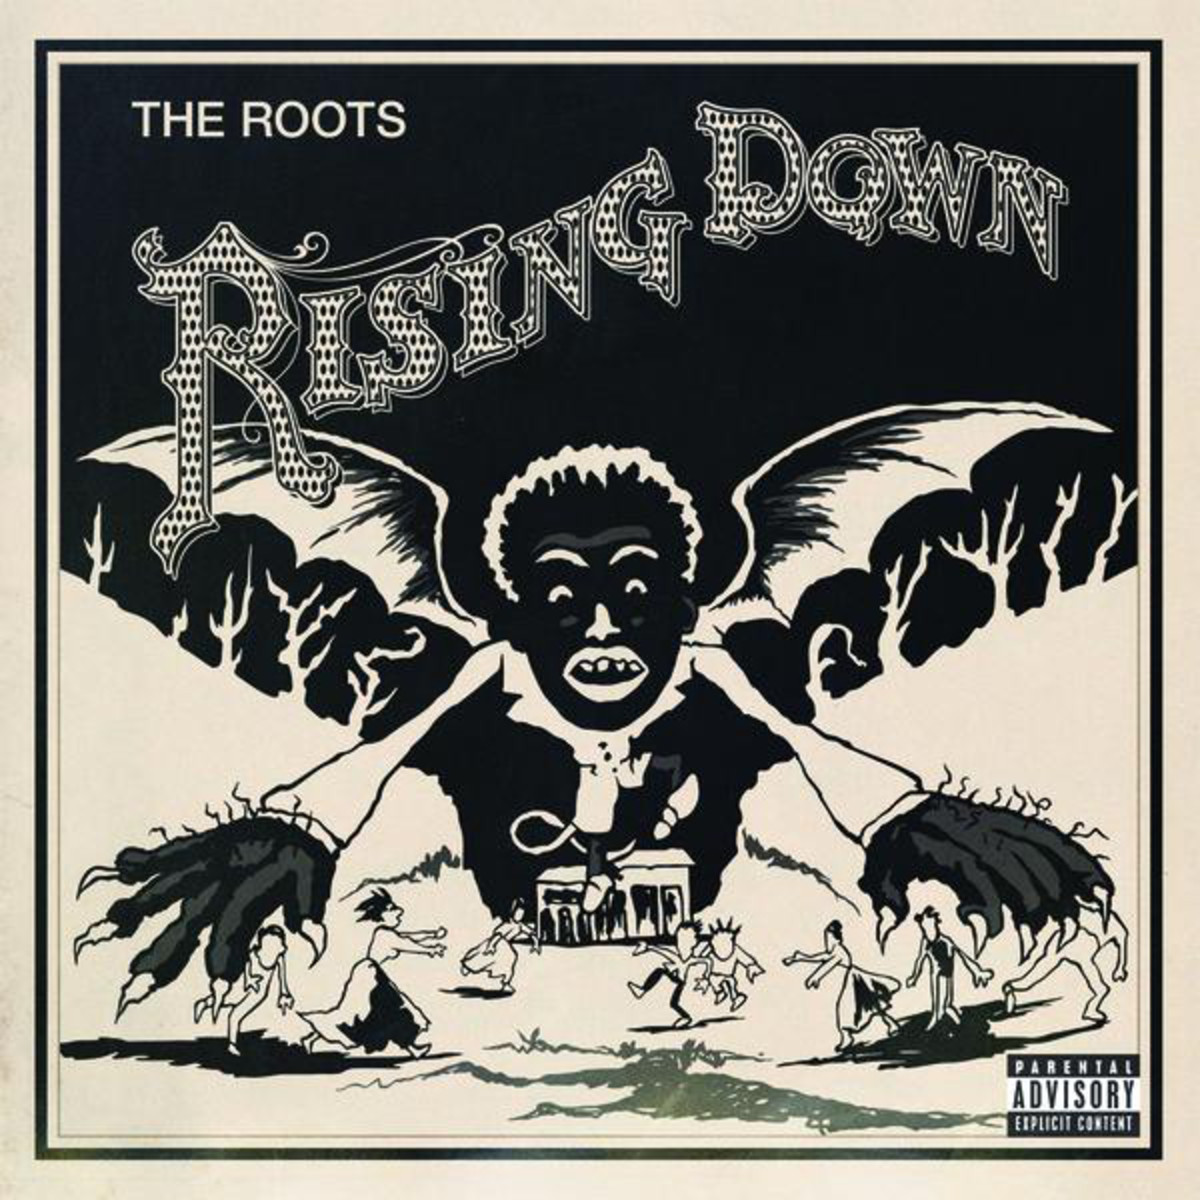 BACK IN THE DAY |4/29/08| The Roots released their eighth album Rising Down on Def